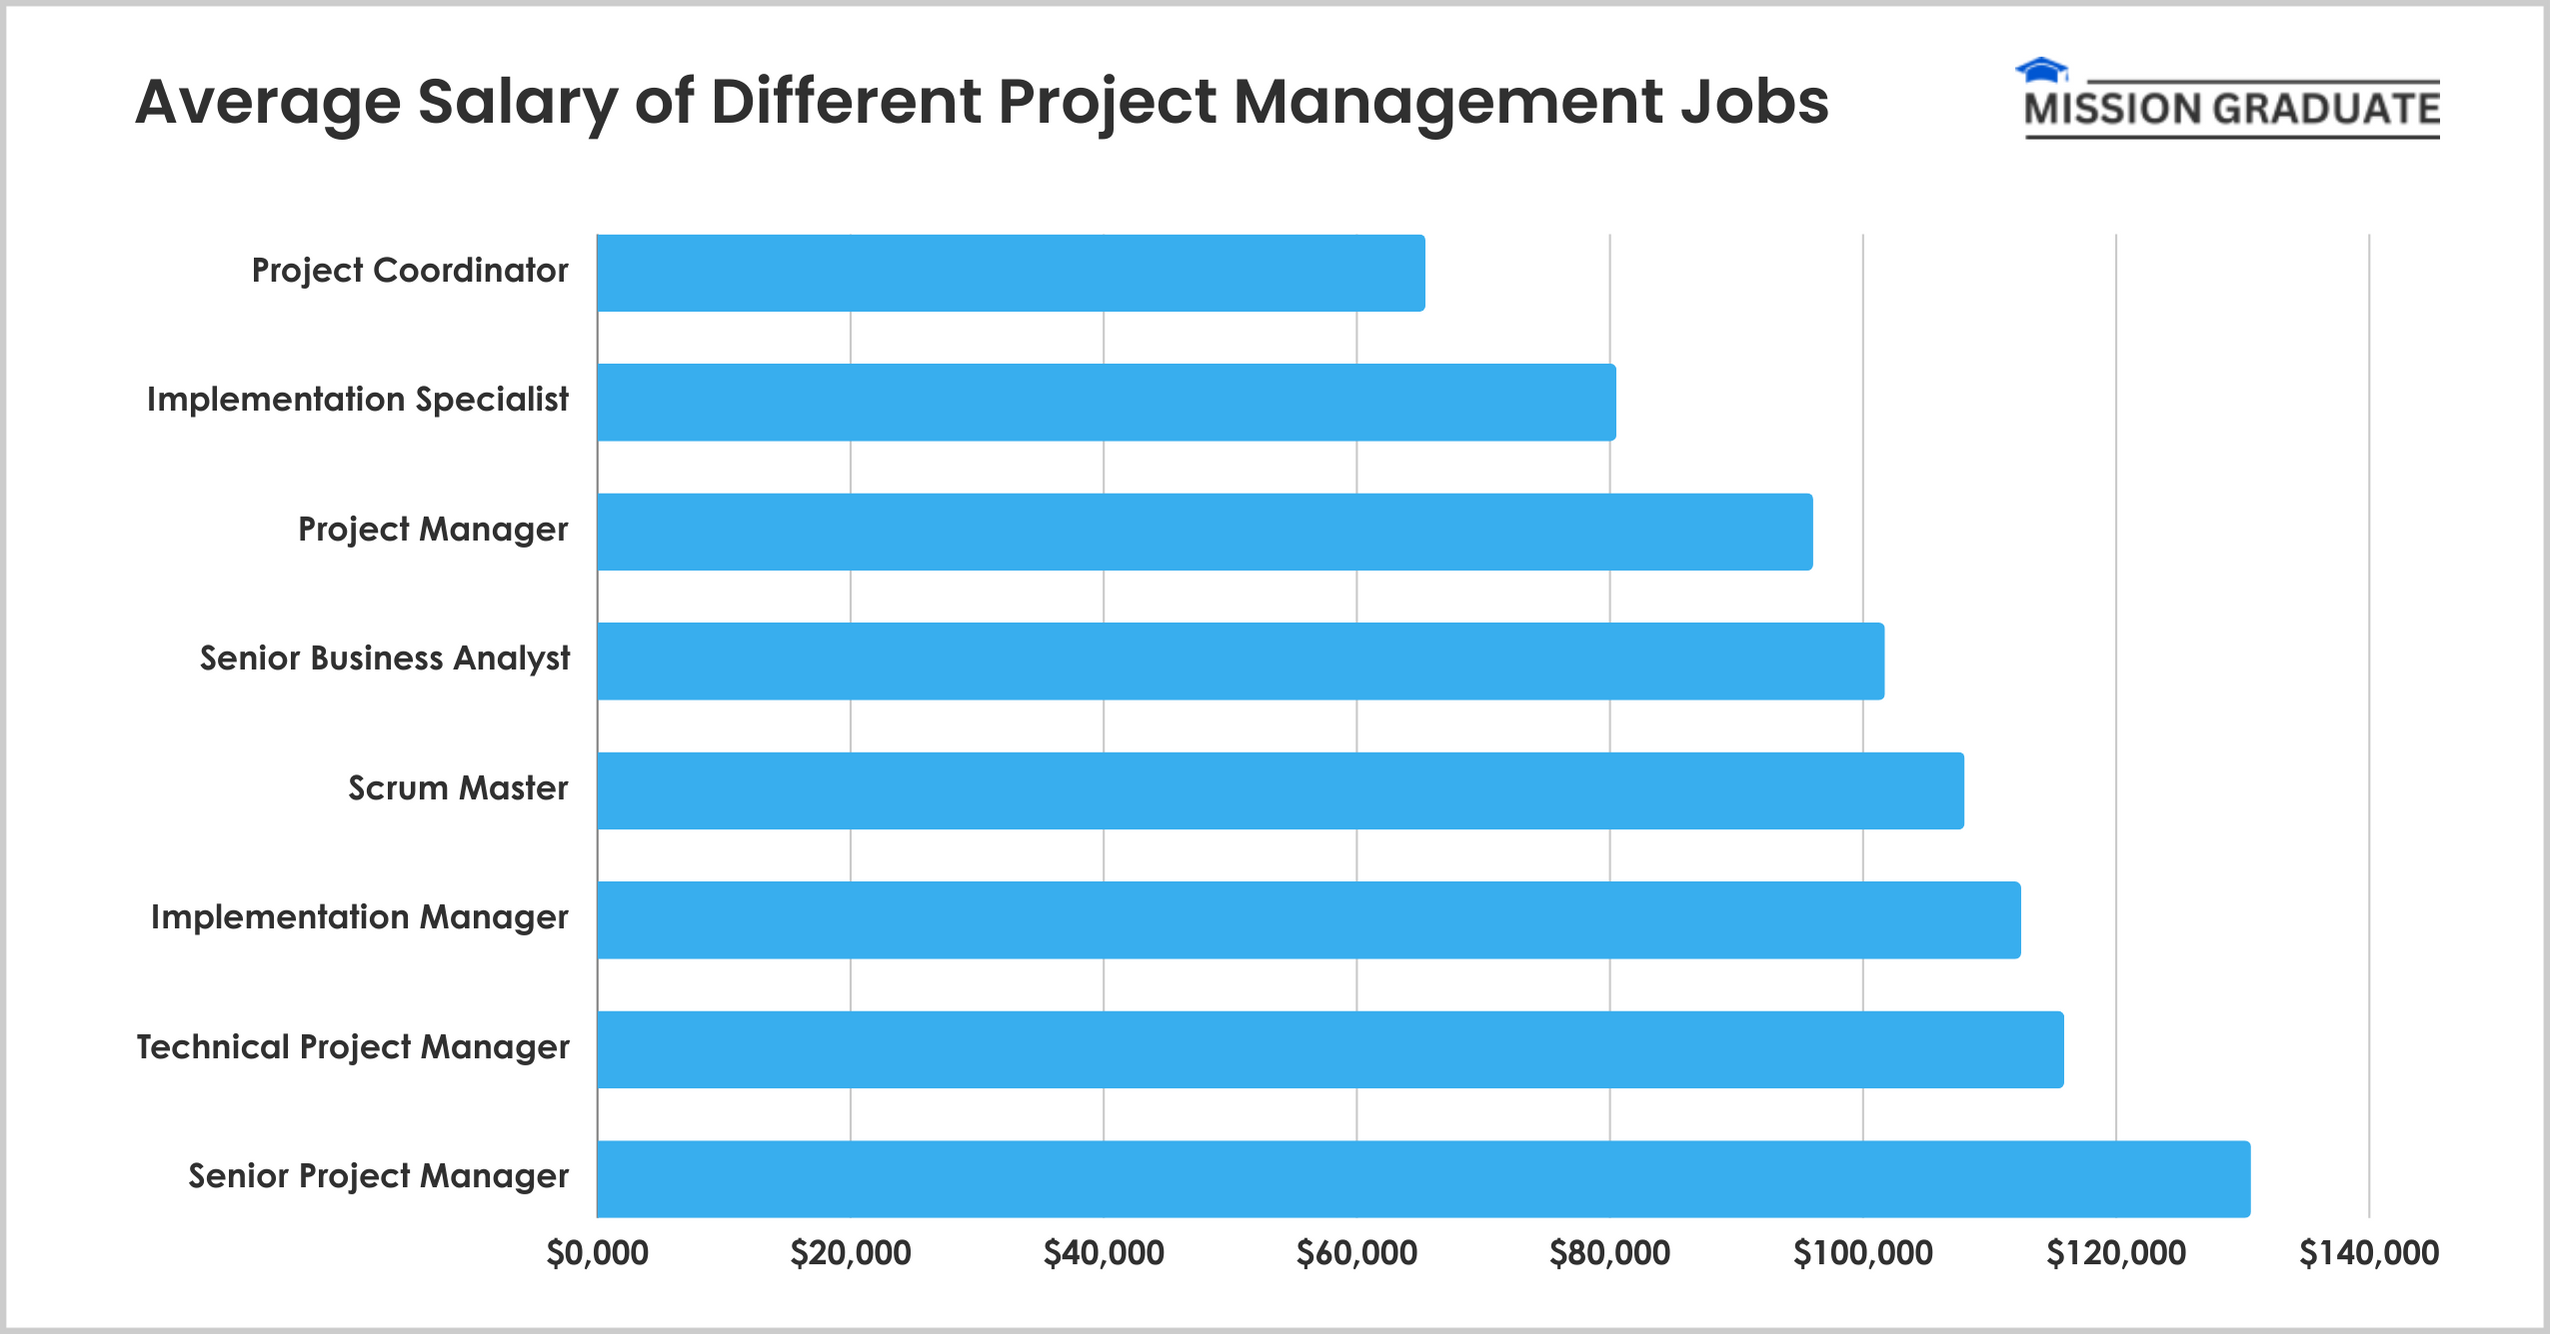 Average Salary of Different Project Management Jobs